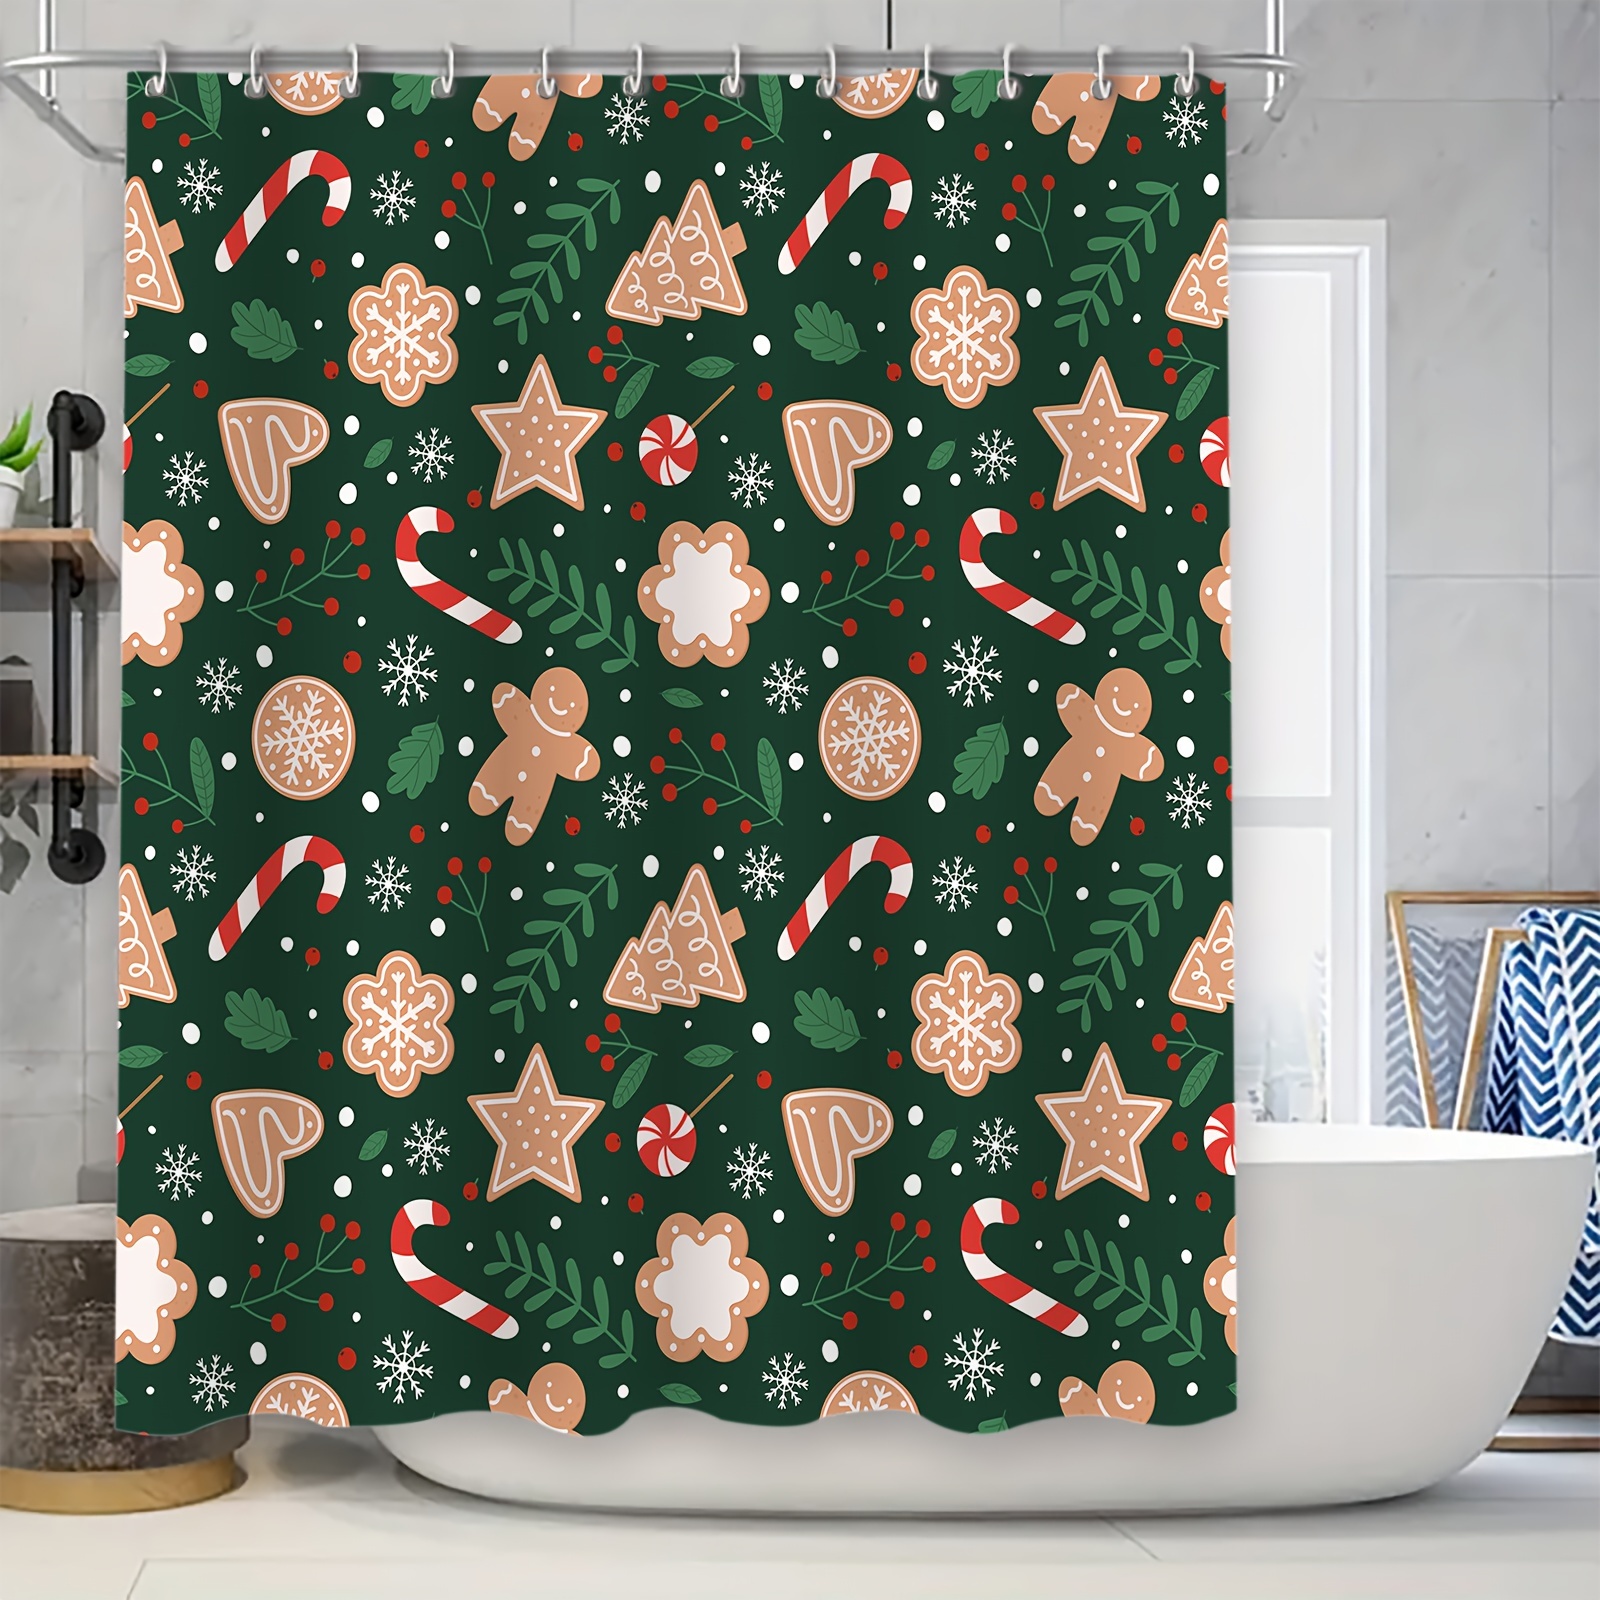 

Festive Gingerbread Christmas Shower Curtain Set With Toilet Seat Cover And Bath Mats - 180cm/70.8inch